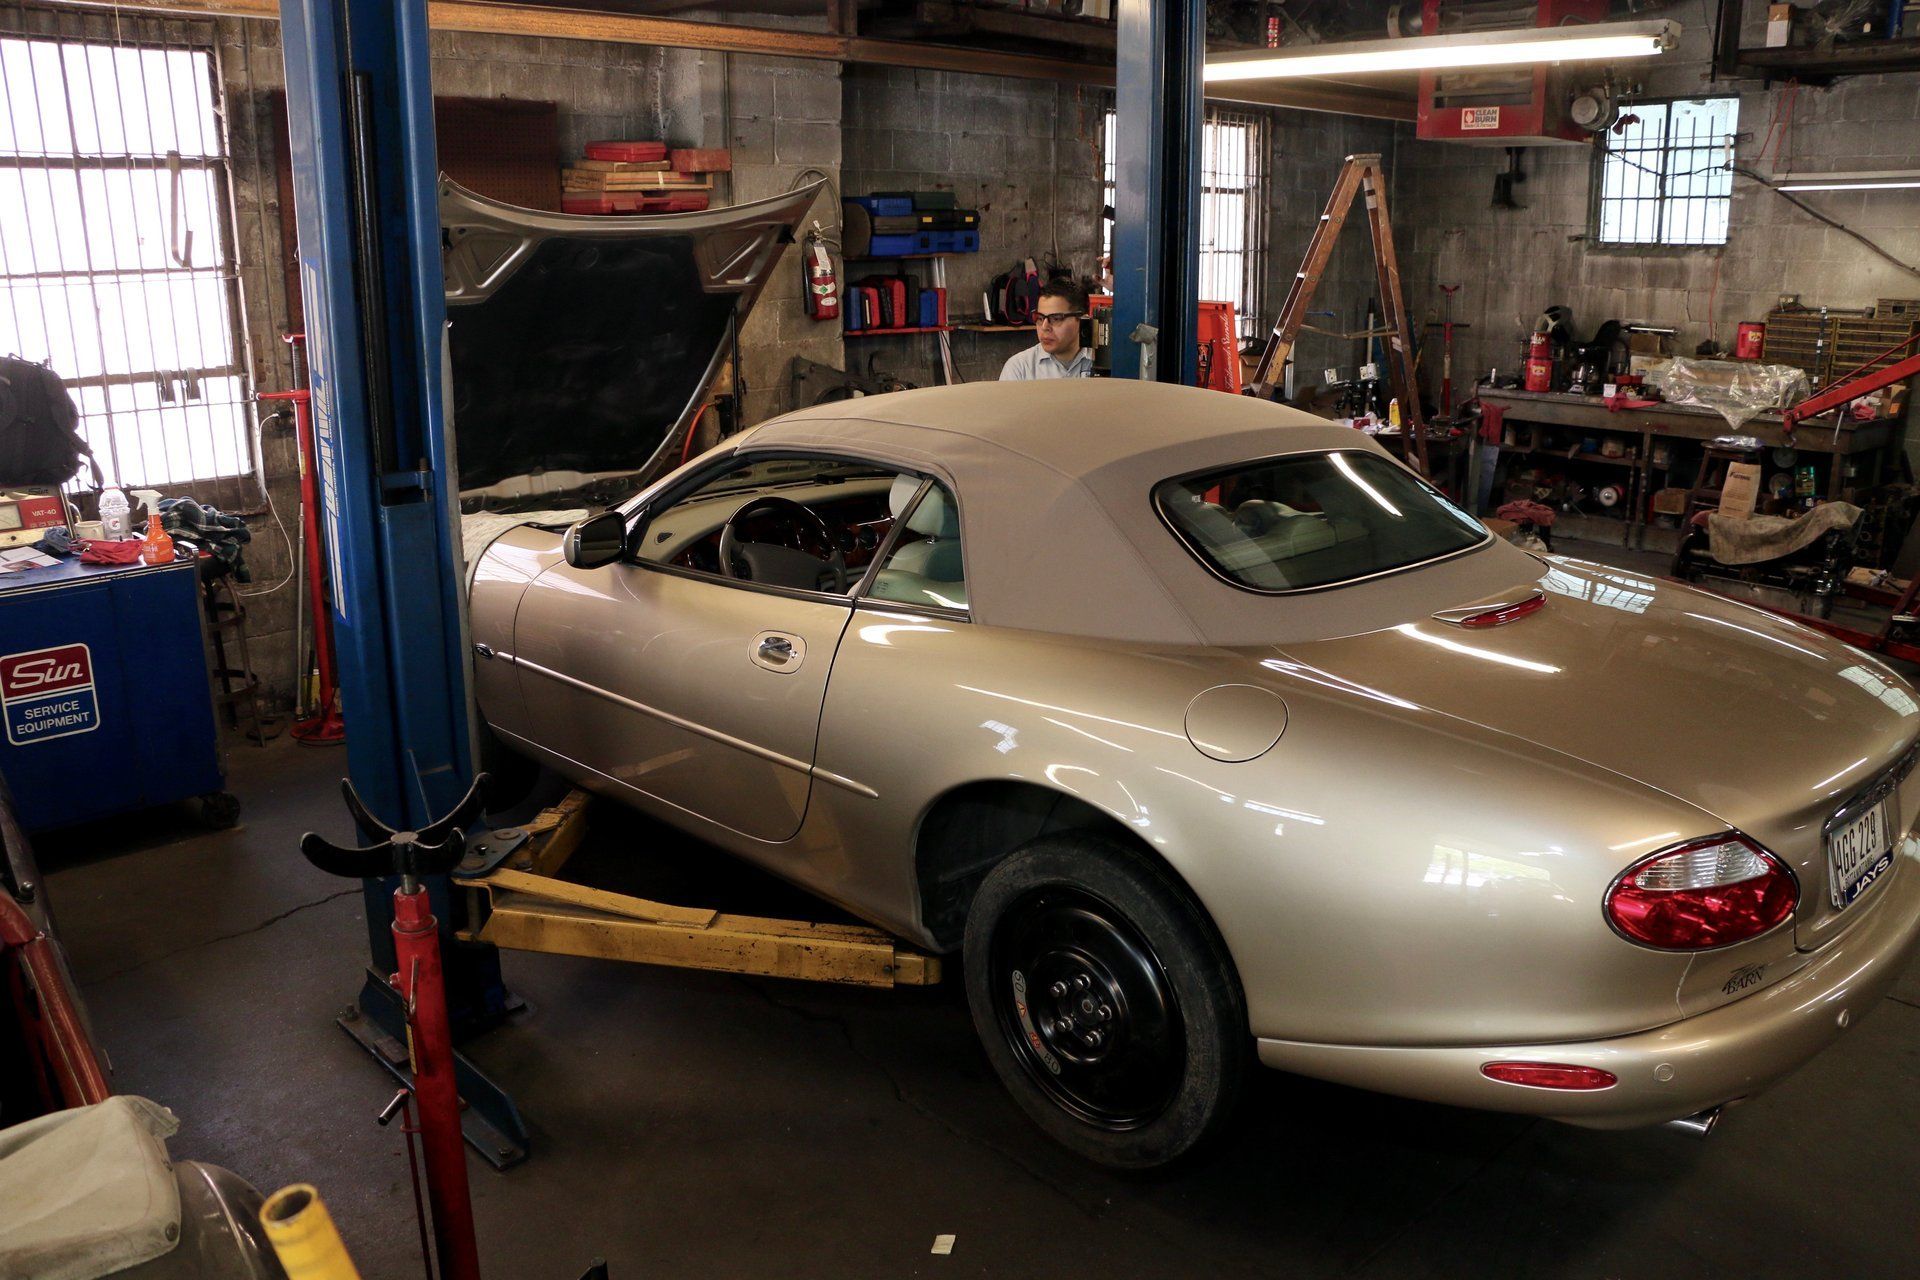 Bring your import to Sports Car Garage for repairs, oil changes & more